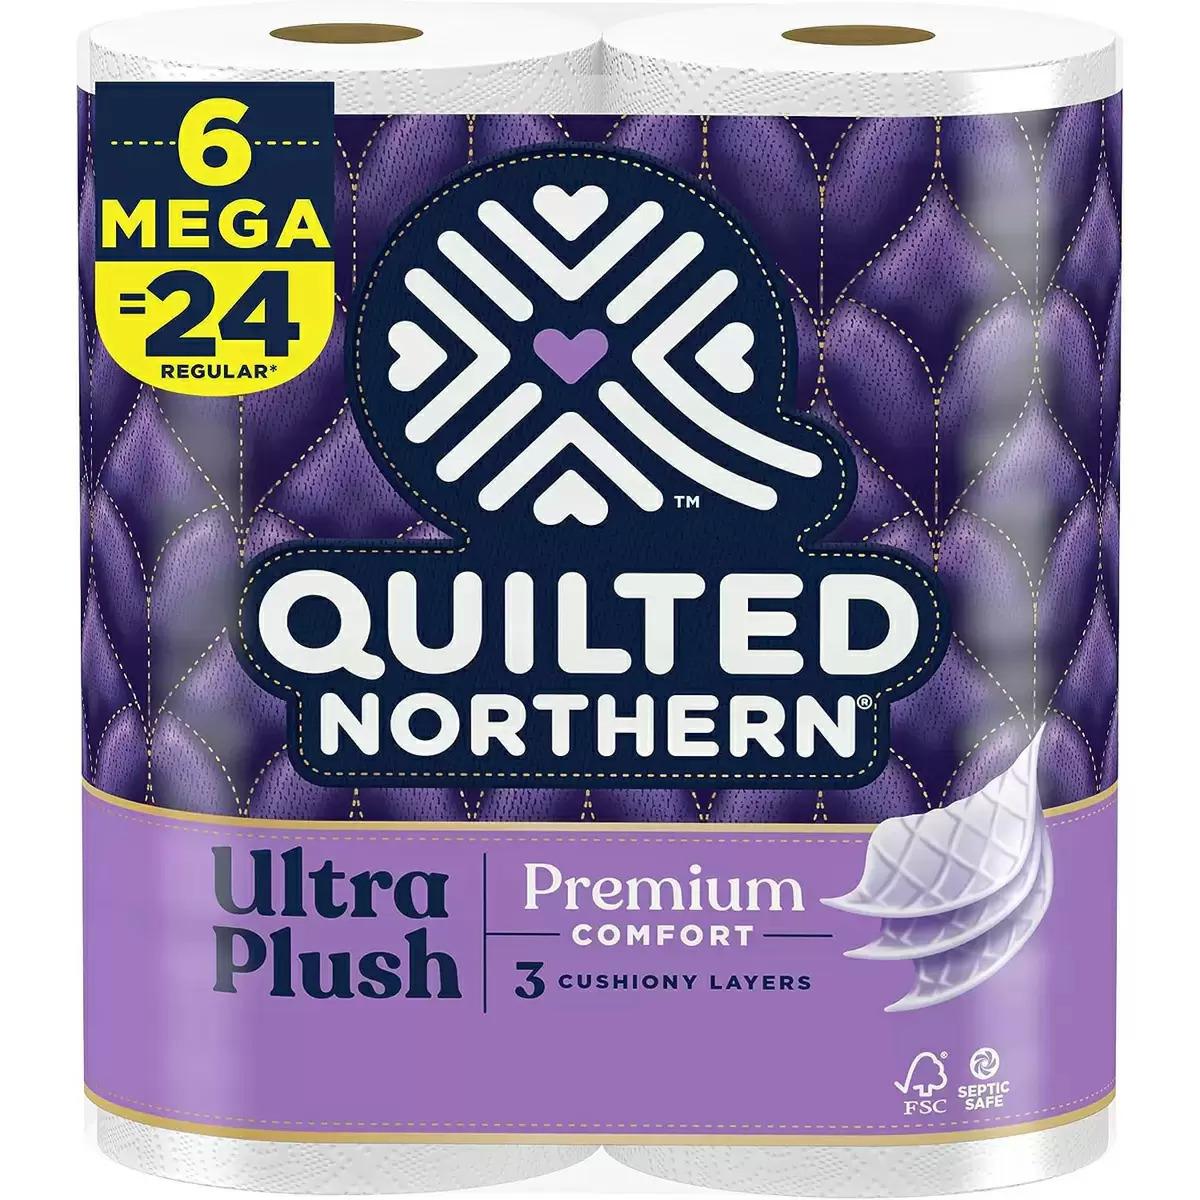 Quilted Northern Ultra Plush Toilet Paper 6 Rolls for $5.59 Shipped